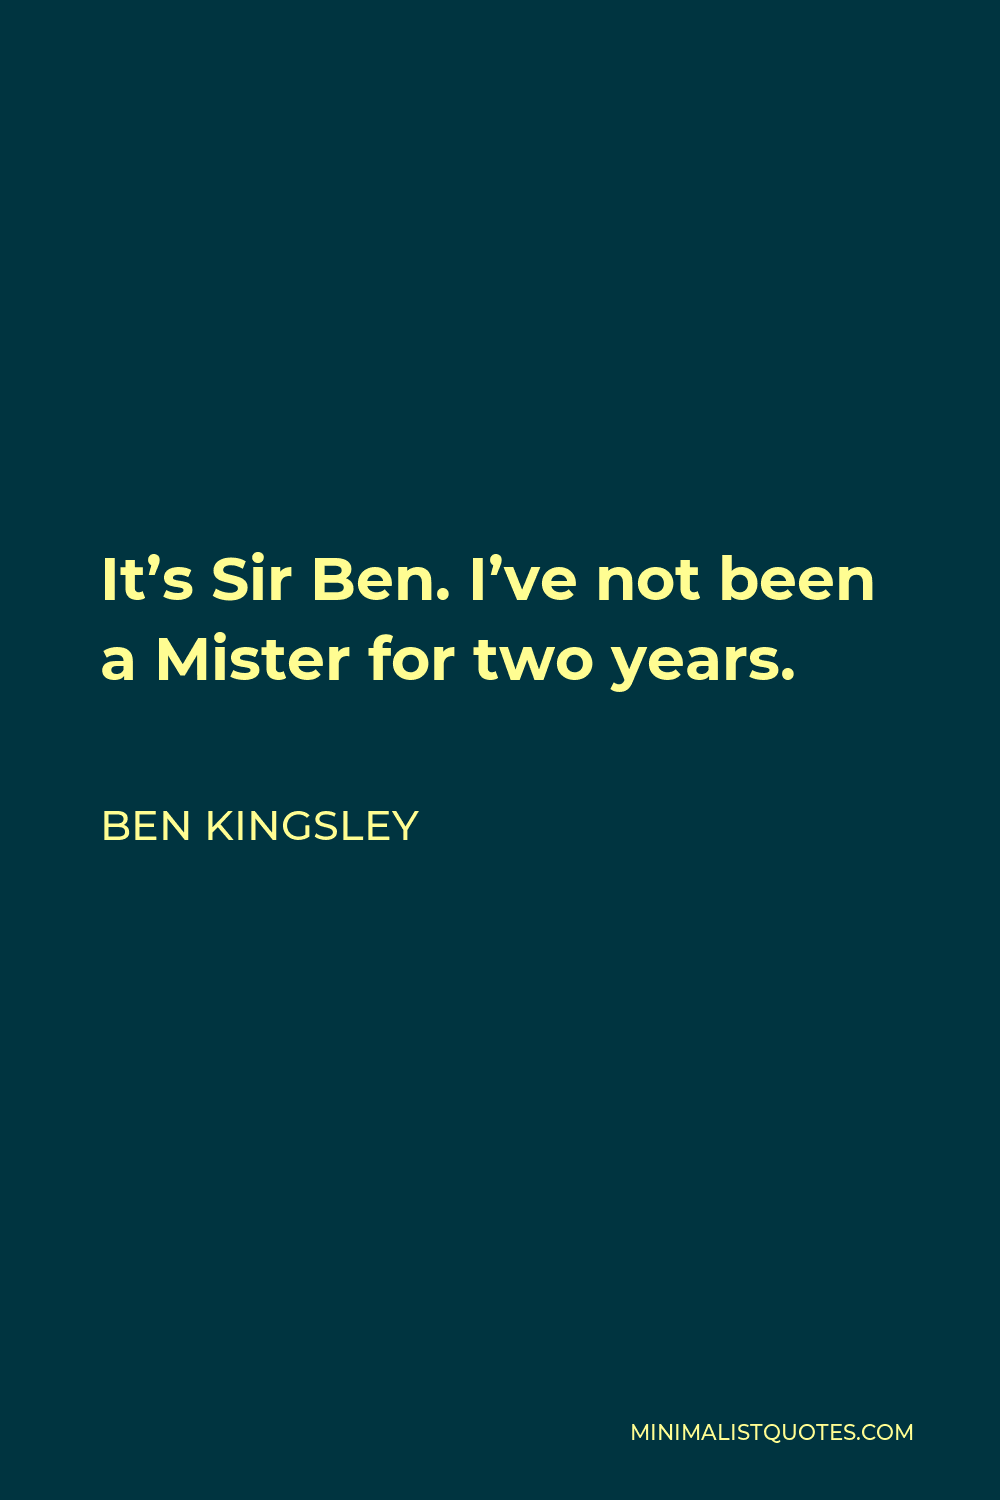 Ben Kingsley Quote - It’s Sir Ben. I’ve not been a Mister for two years.